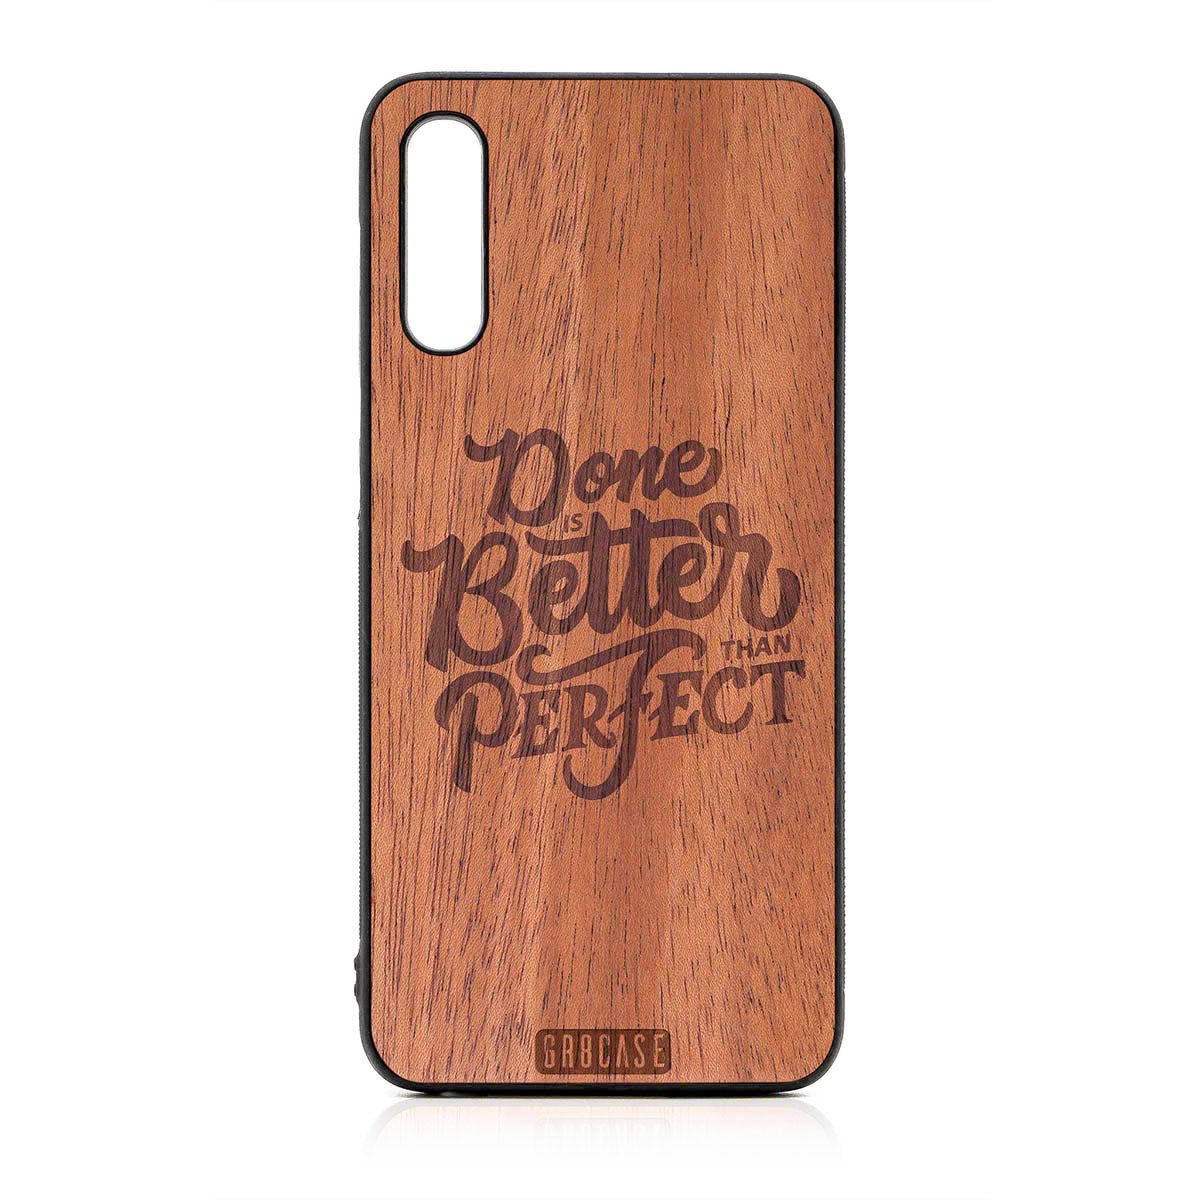 Done Is Better Than Perfect Design Wood Case For Samsung Galaxy A50 by GR8CASE